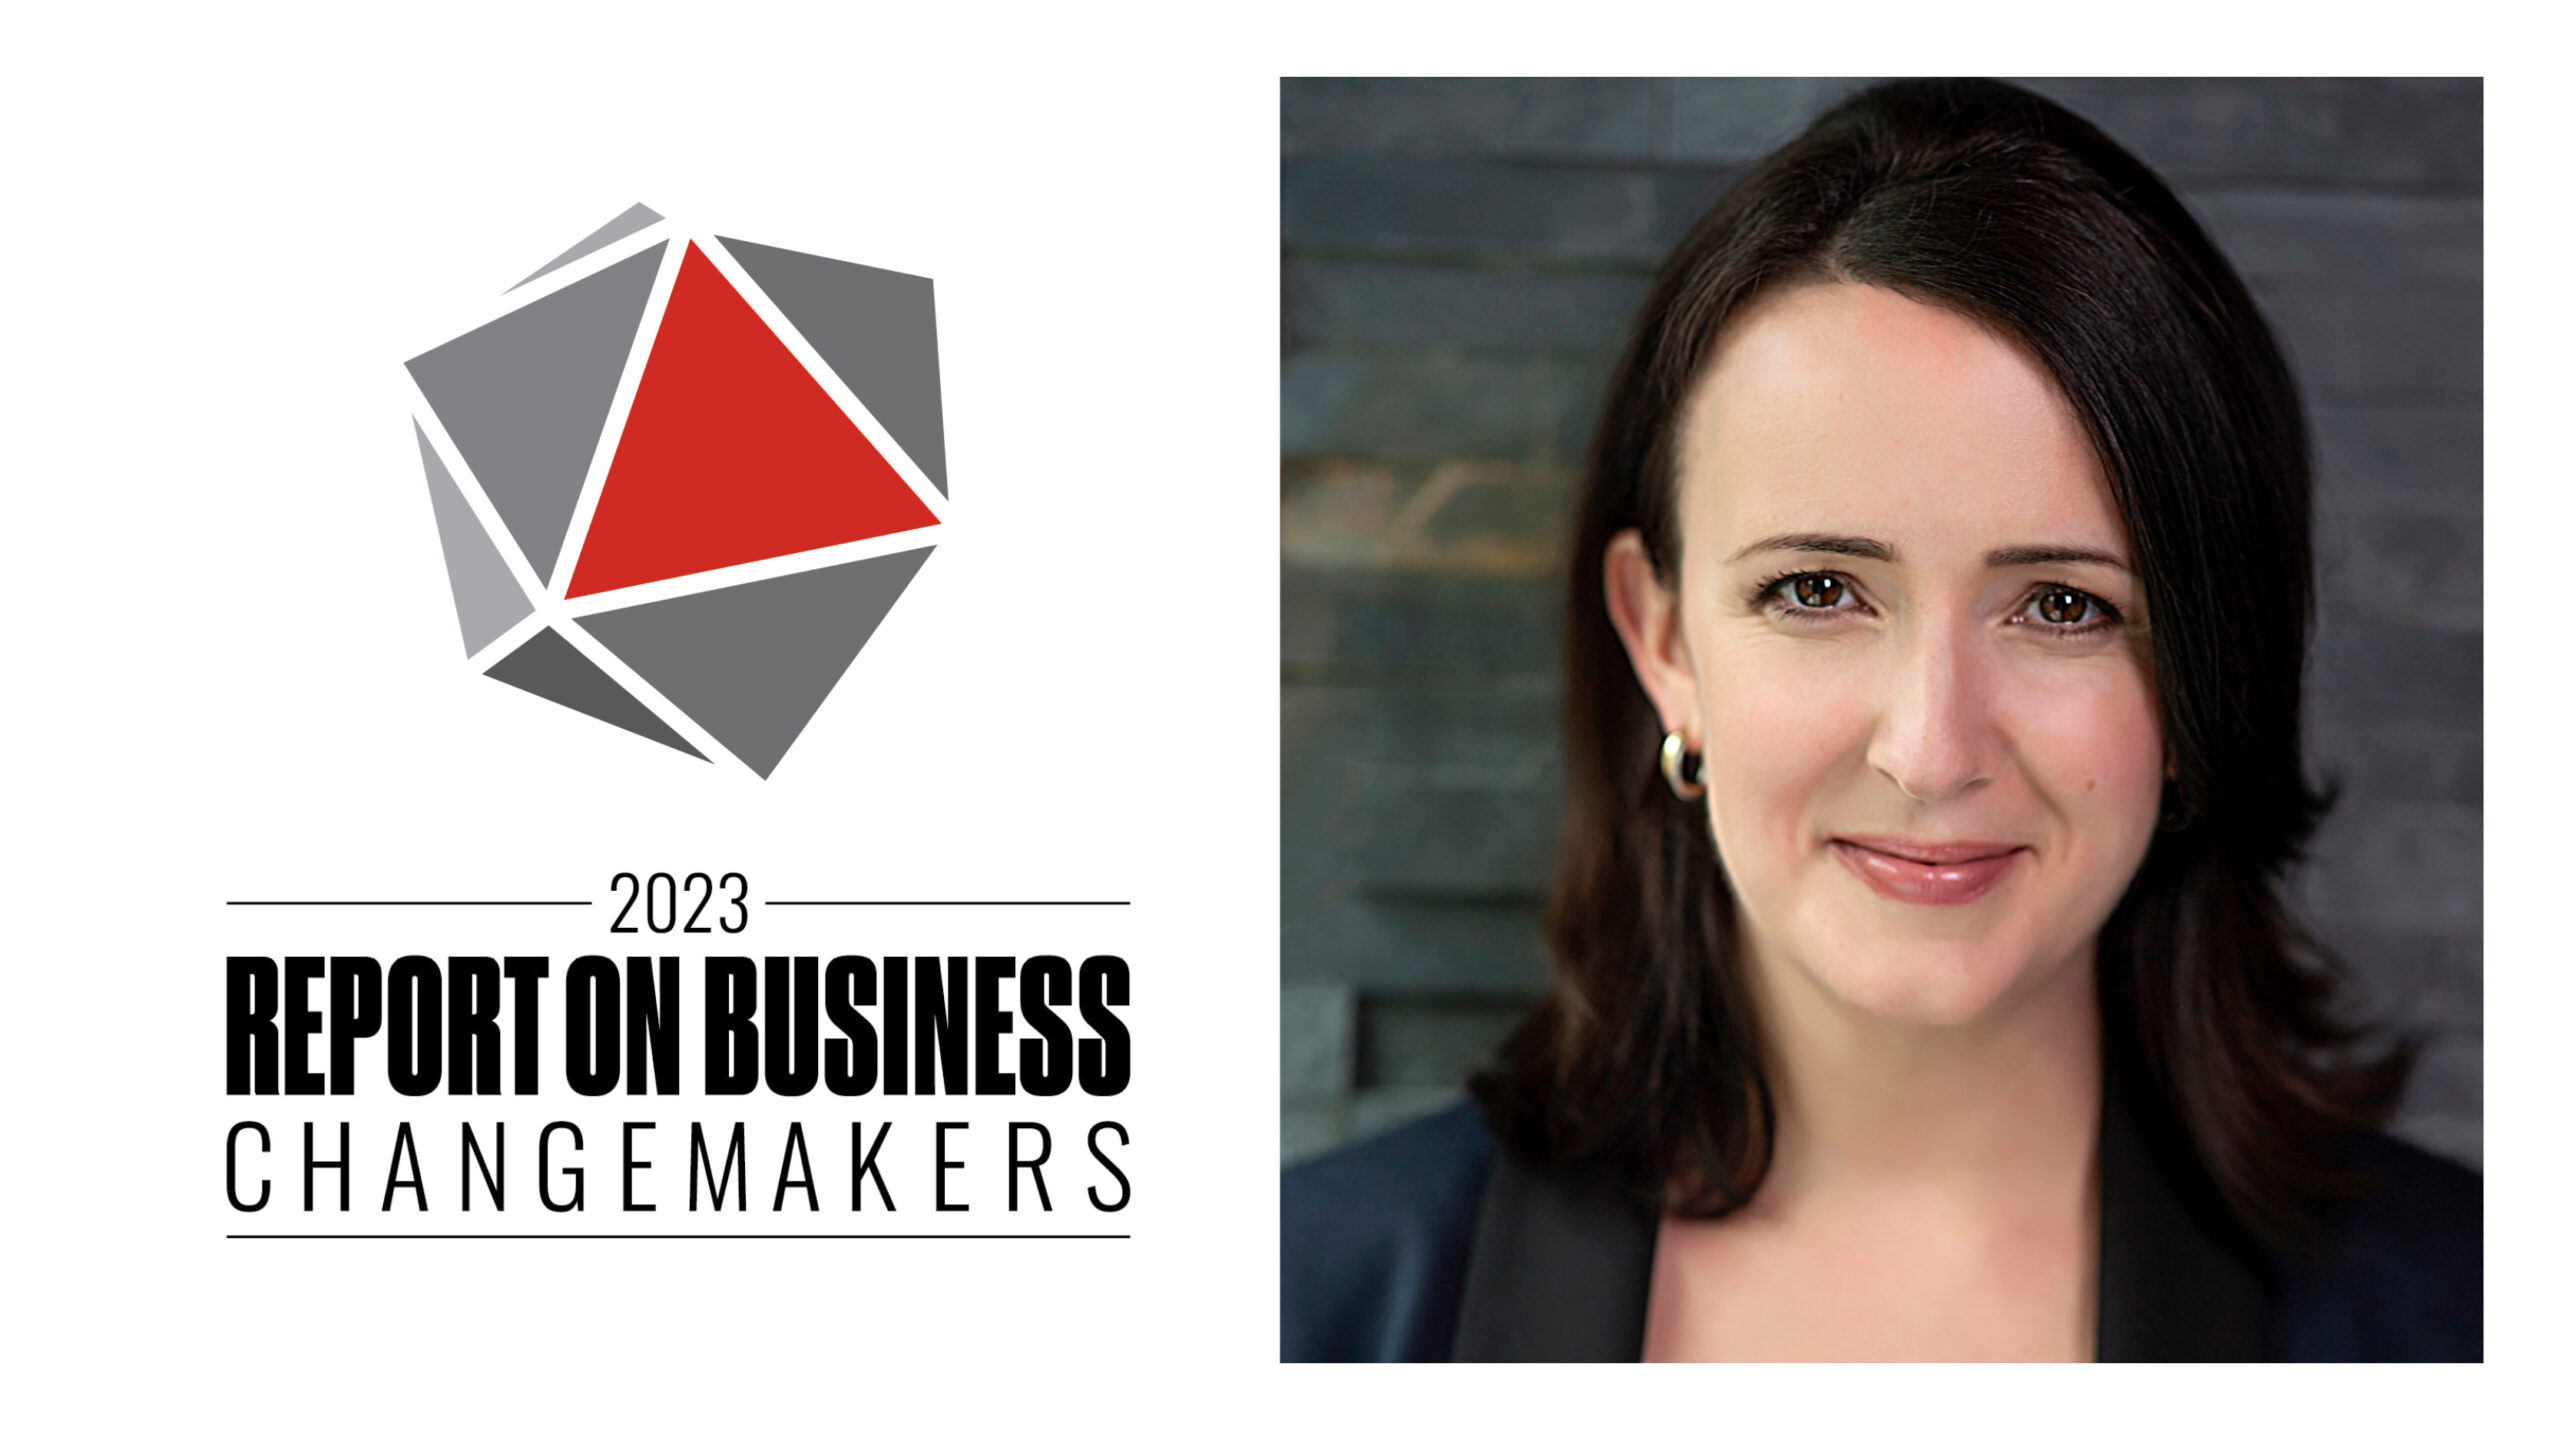 A smiling woman with dark hair next to the logo for the Report on Business Changemakers 2023.